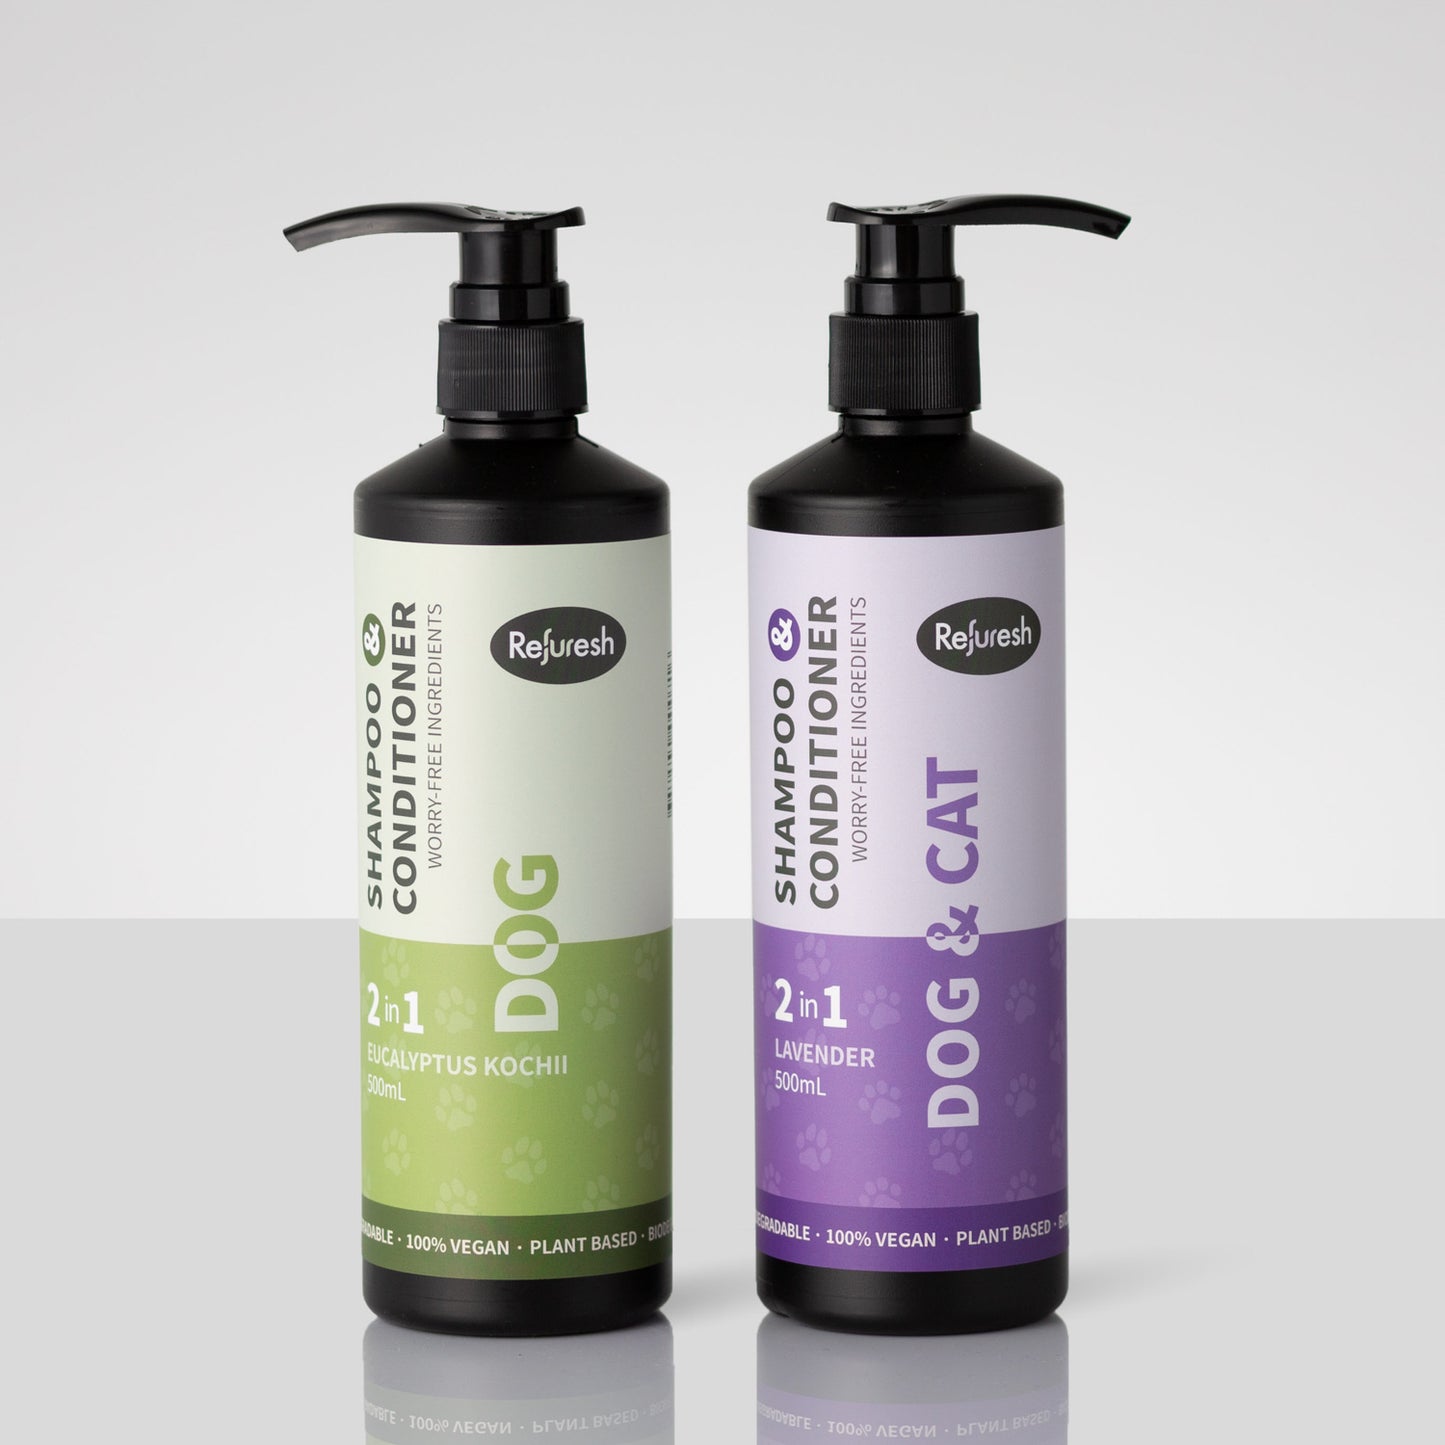 2 in 1 Dog shampoo and conditioner for sensitive skin